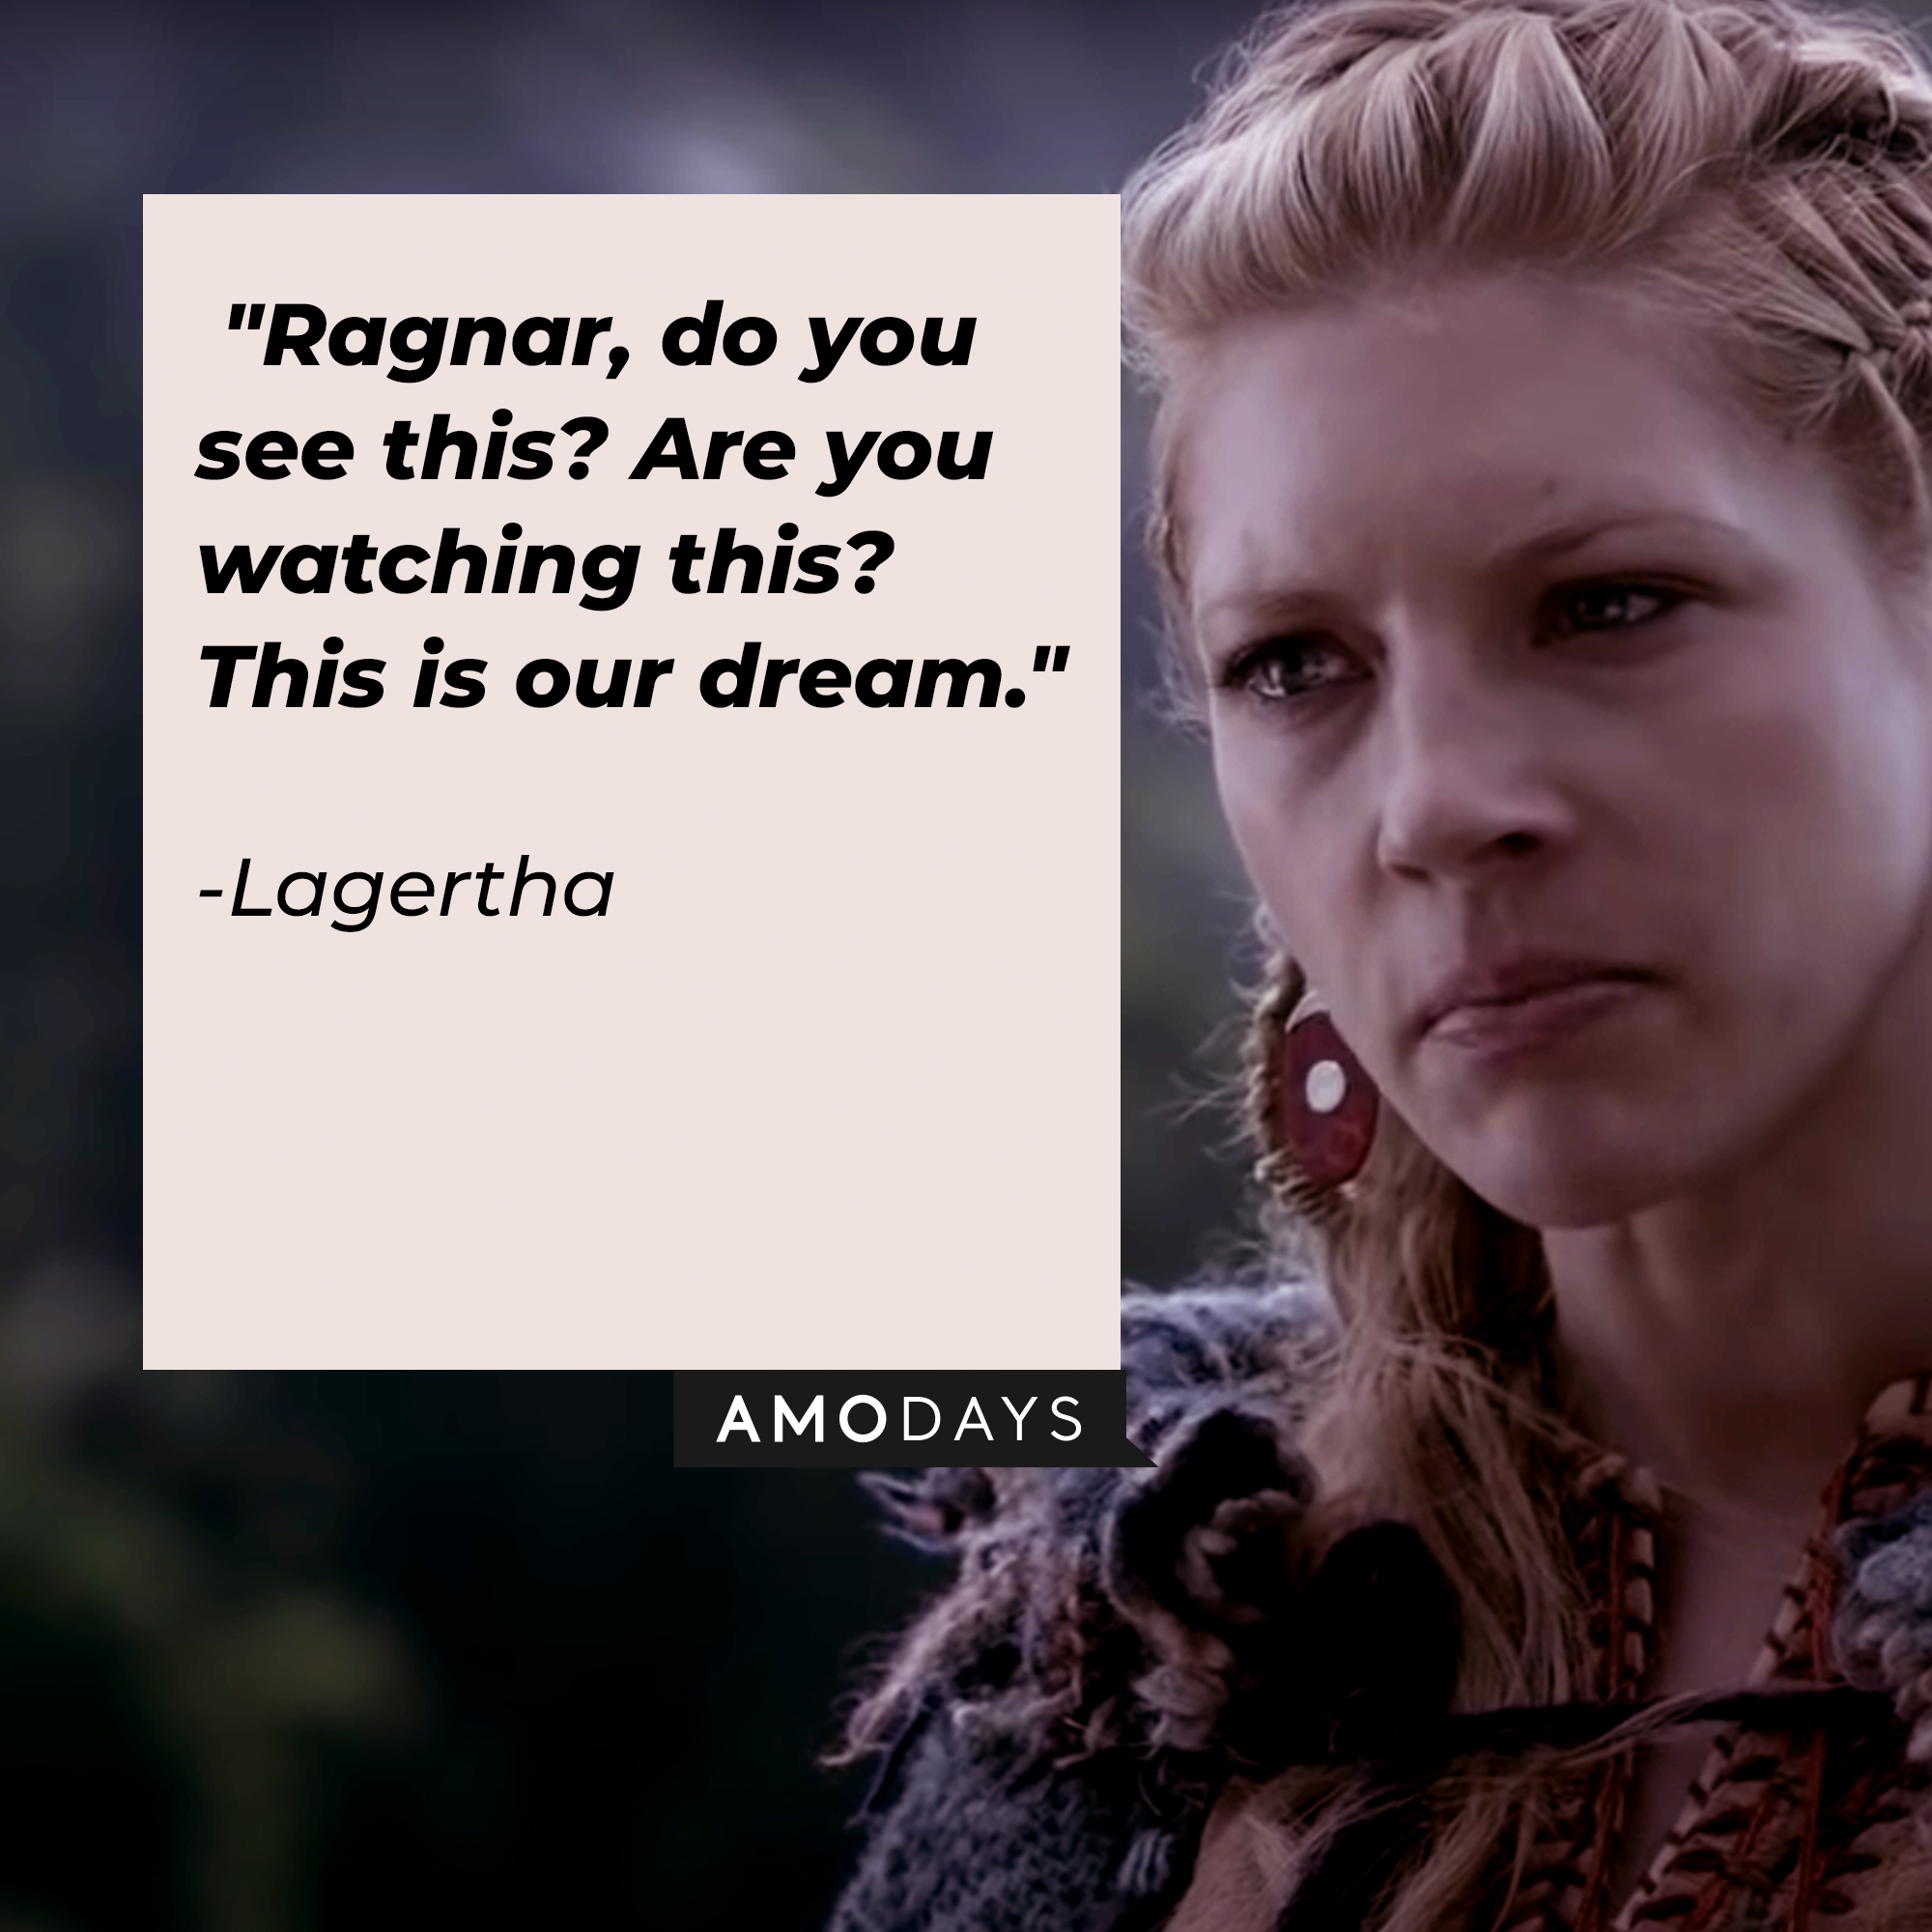 Lagertha's quote: "Ragnar, do you see this? Are you watching this? This is our dream." | Source: youtube.com/PrimeVideoUK